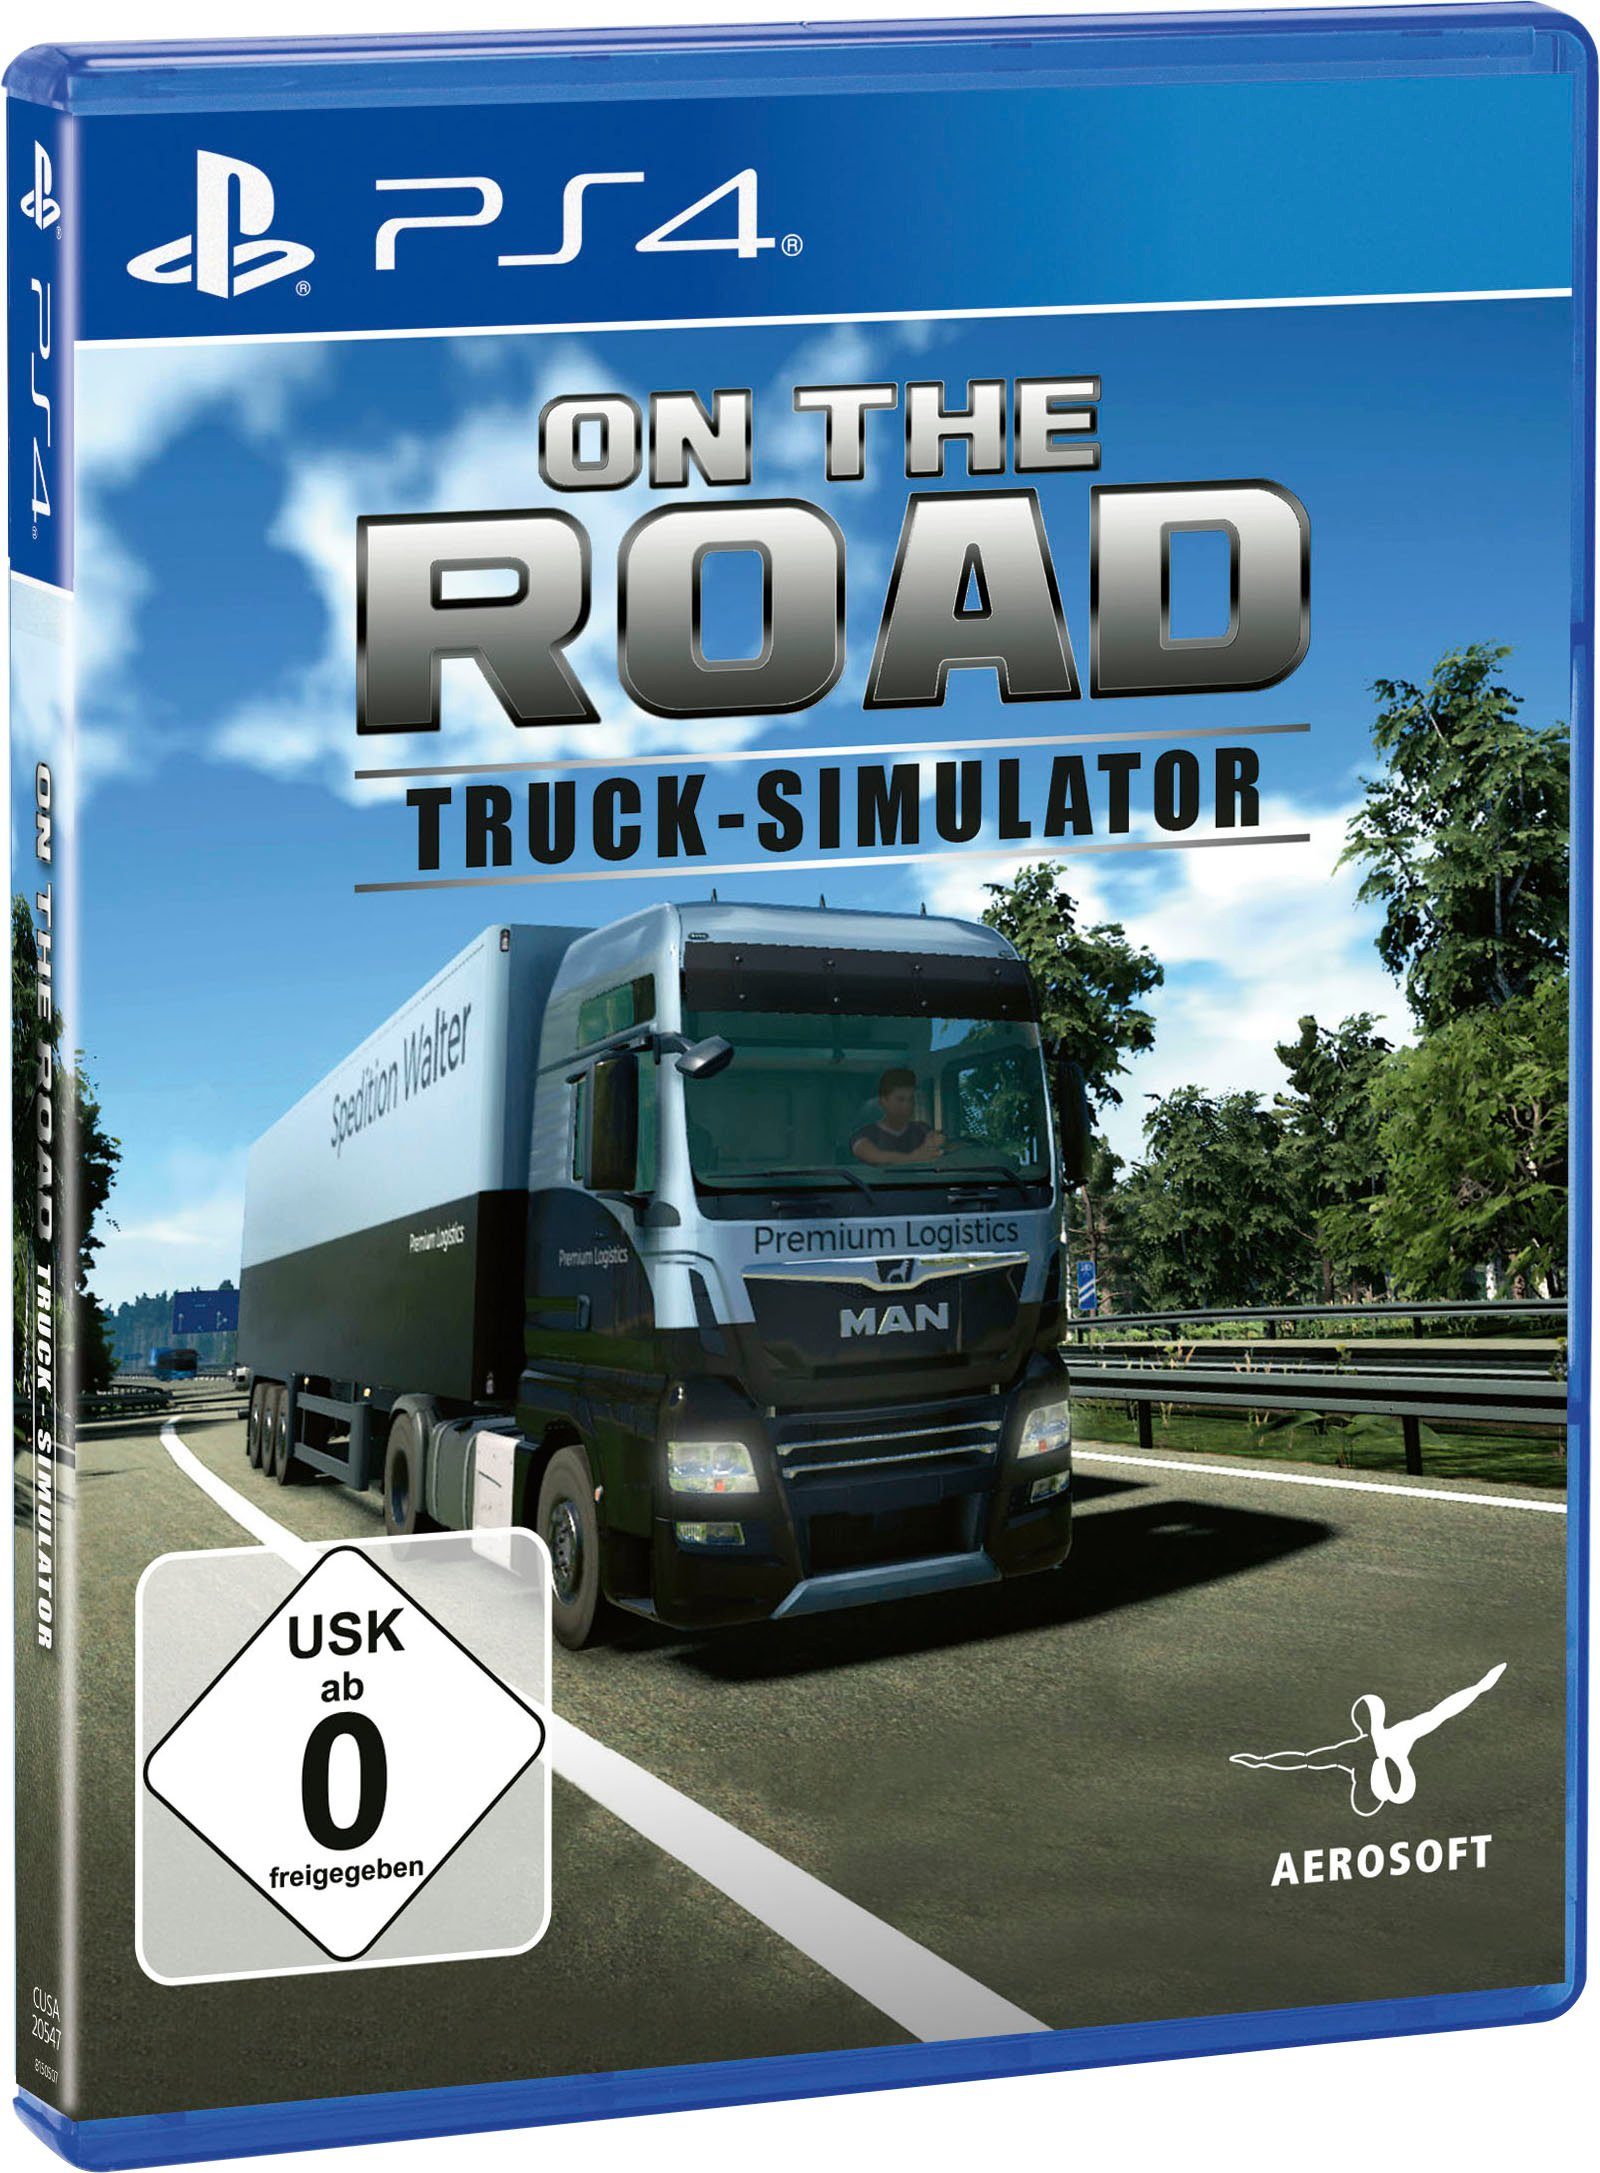 Simulator the 4 On Road - PlayStation Truck